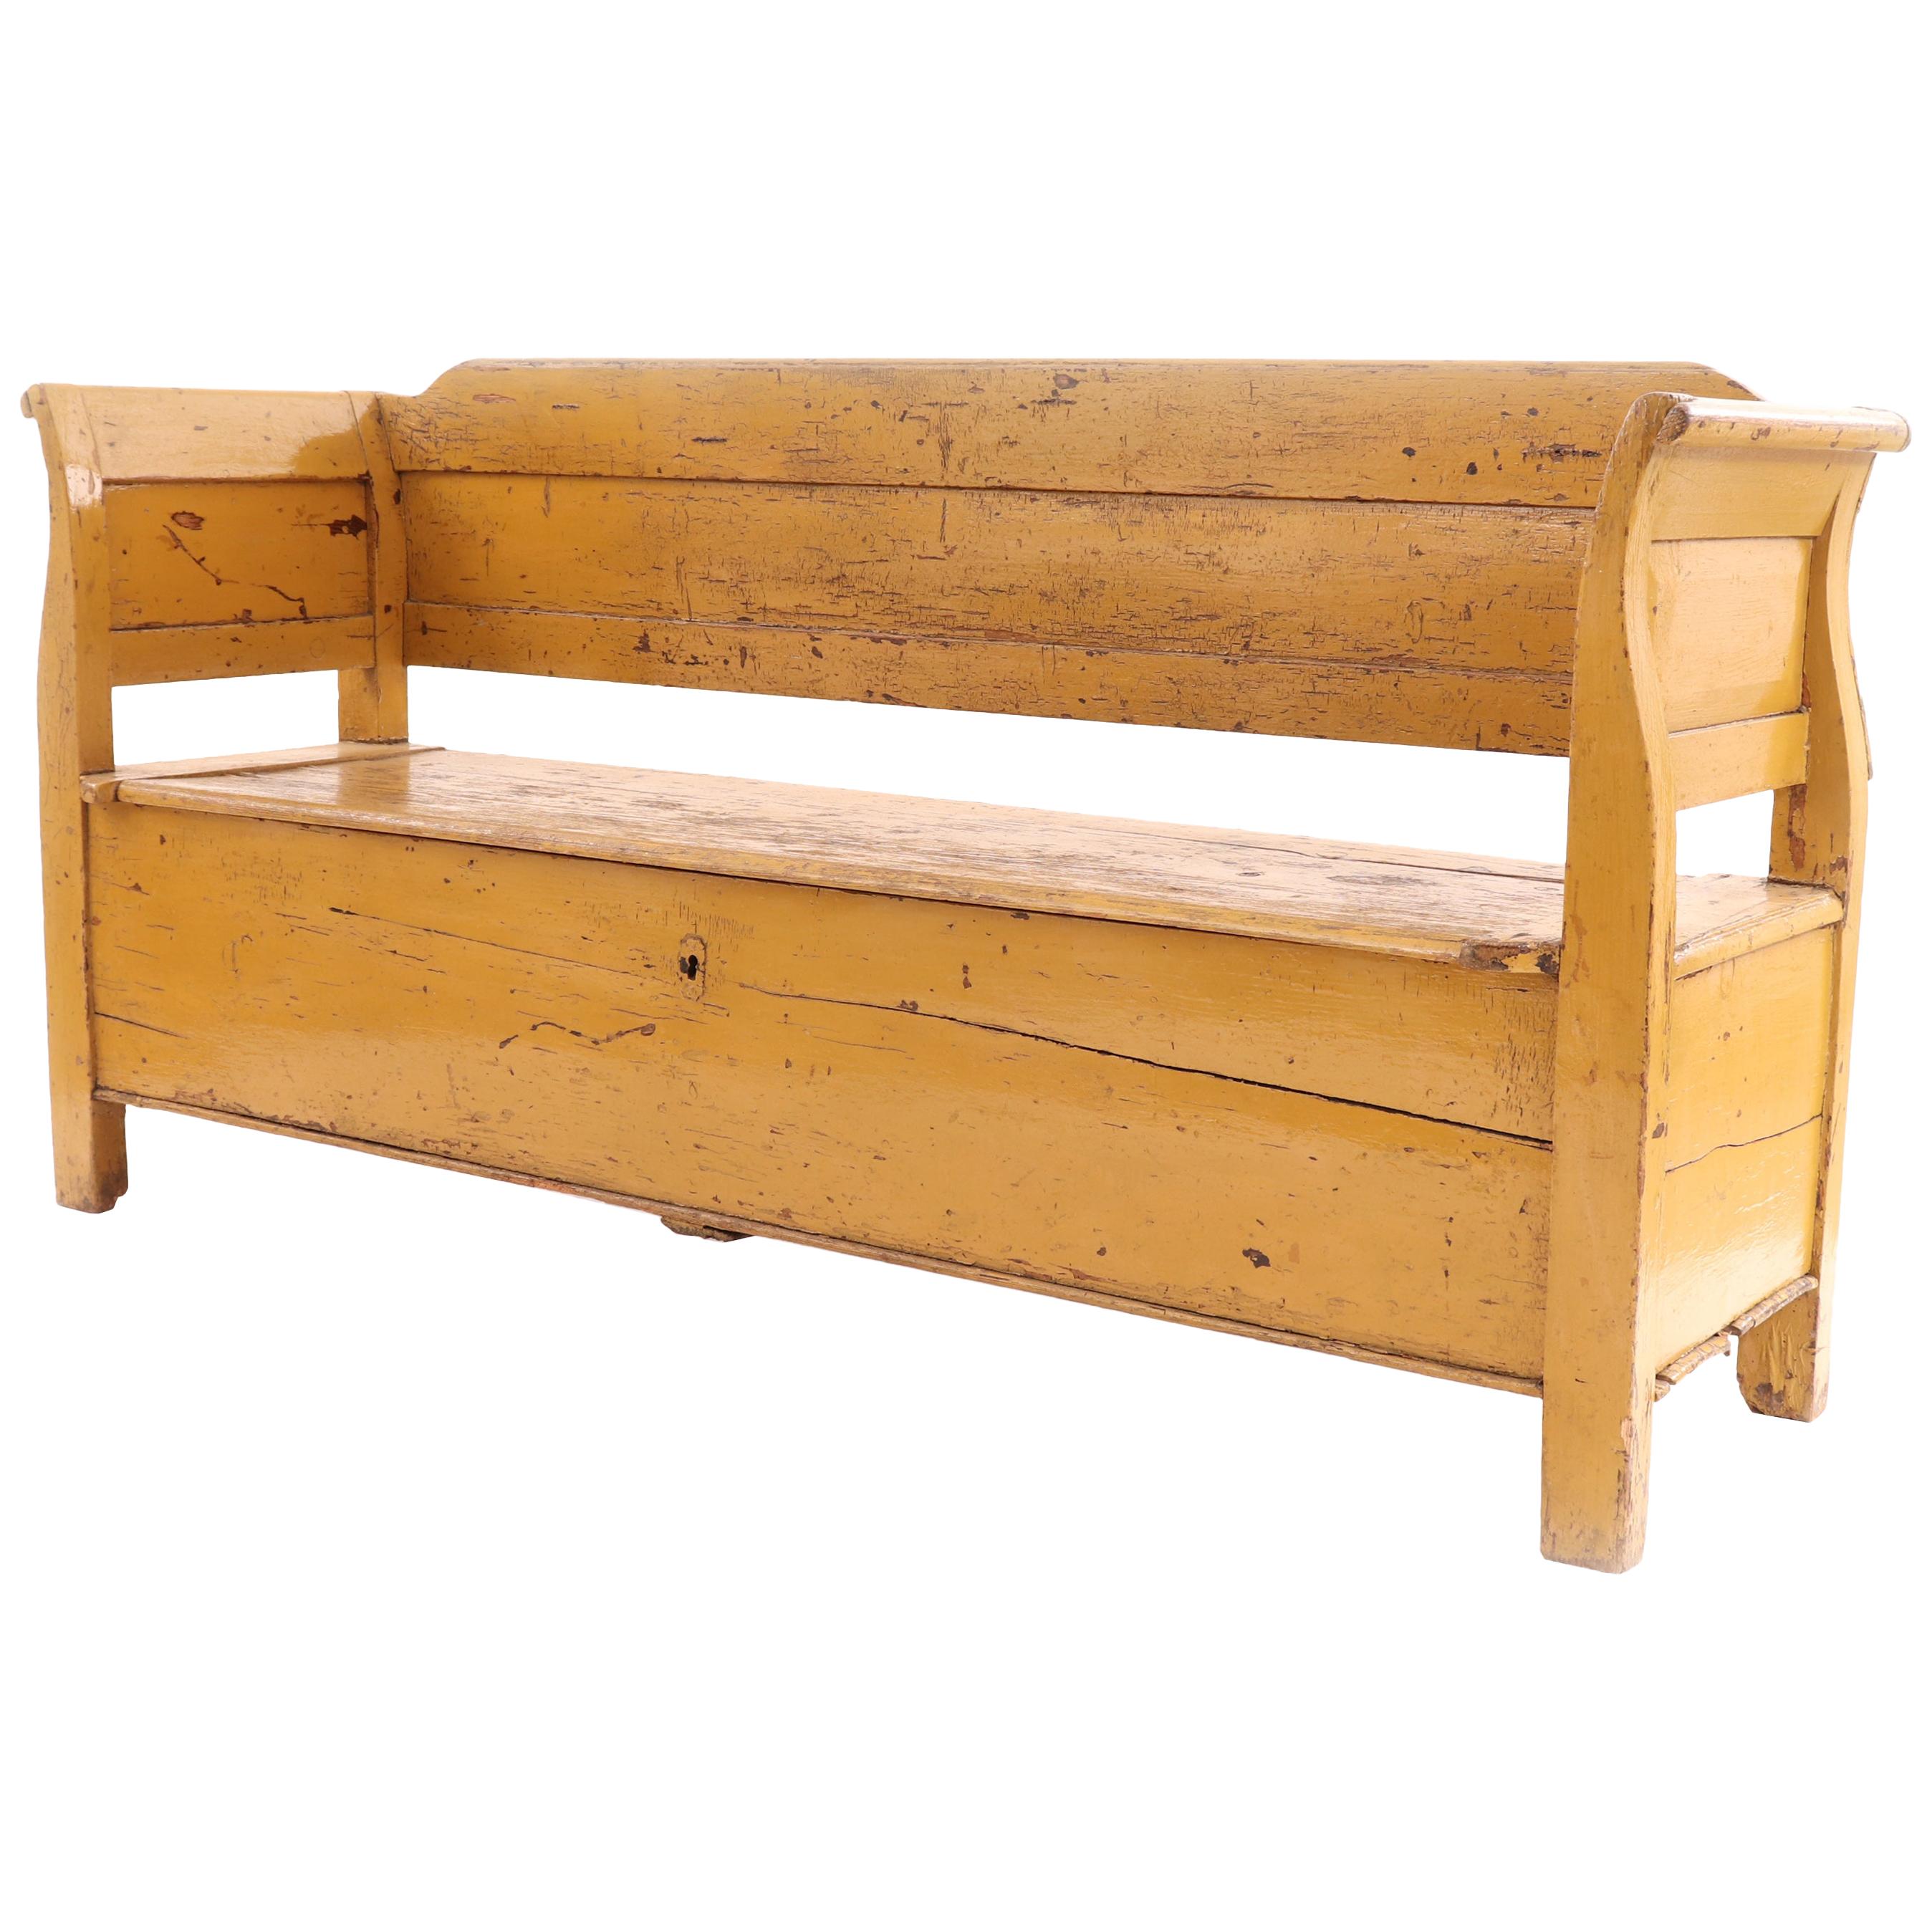 Country Rustic Yellow Wooden Bench For Sale